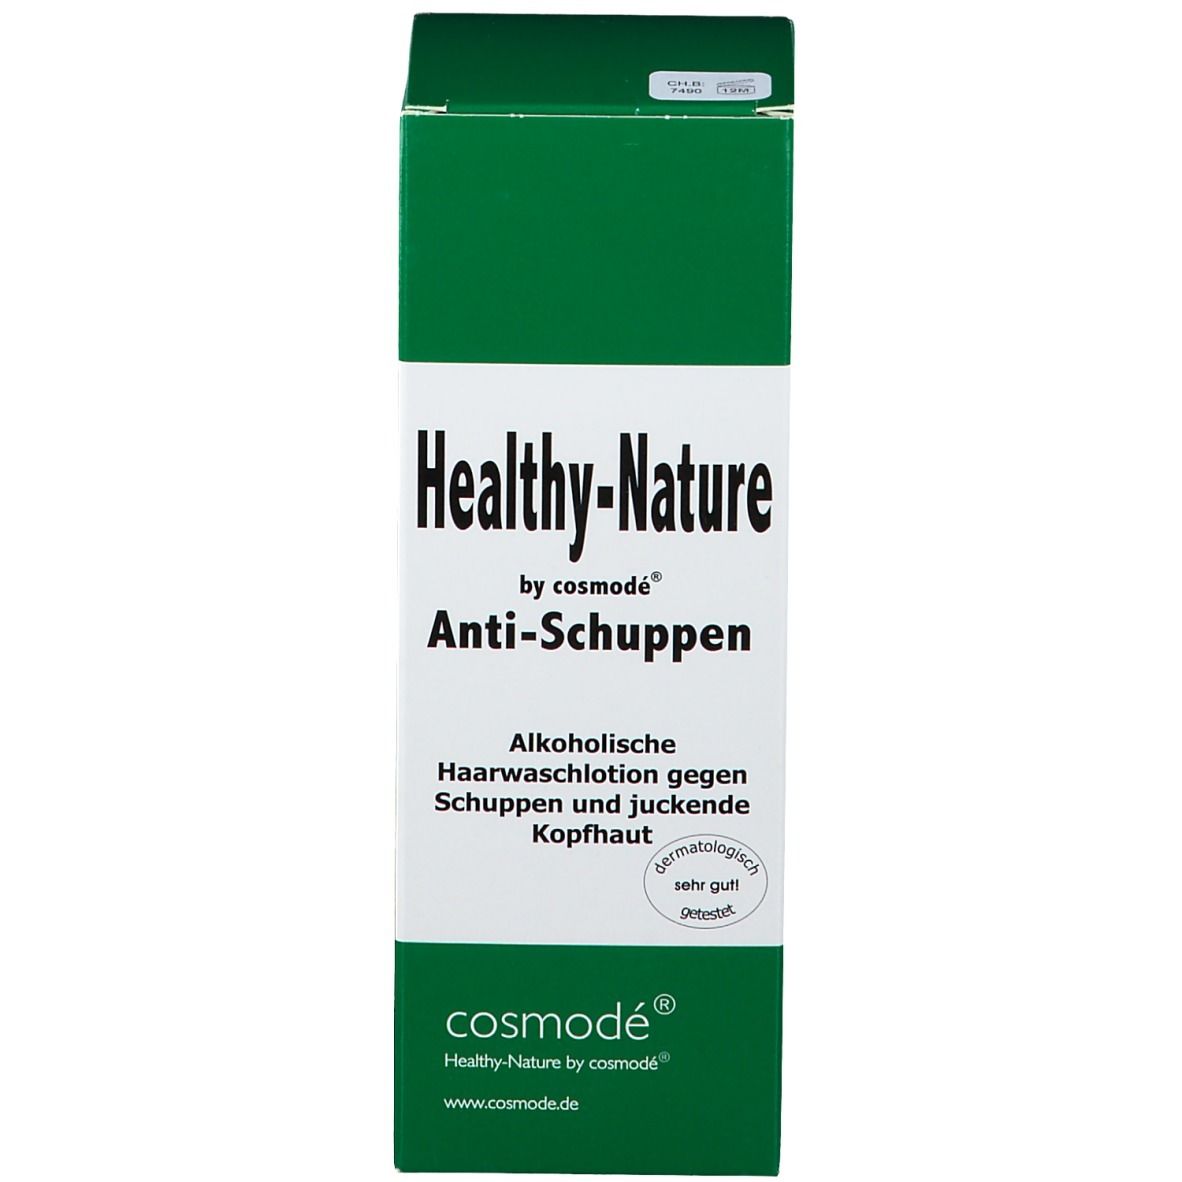 Healthy-Nature by cosmodé® Anti-Schuppen